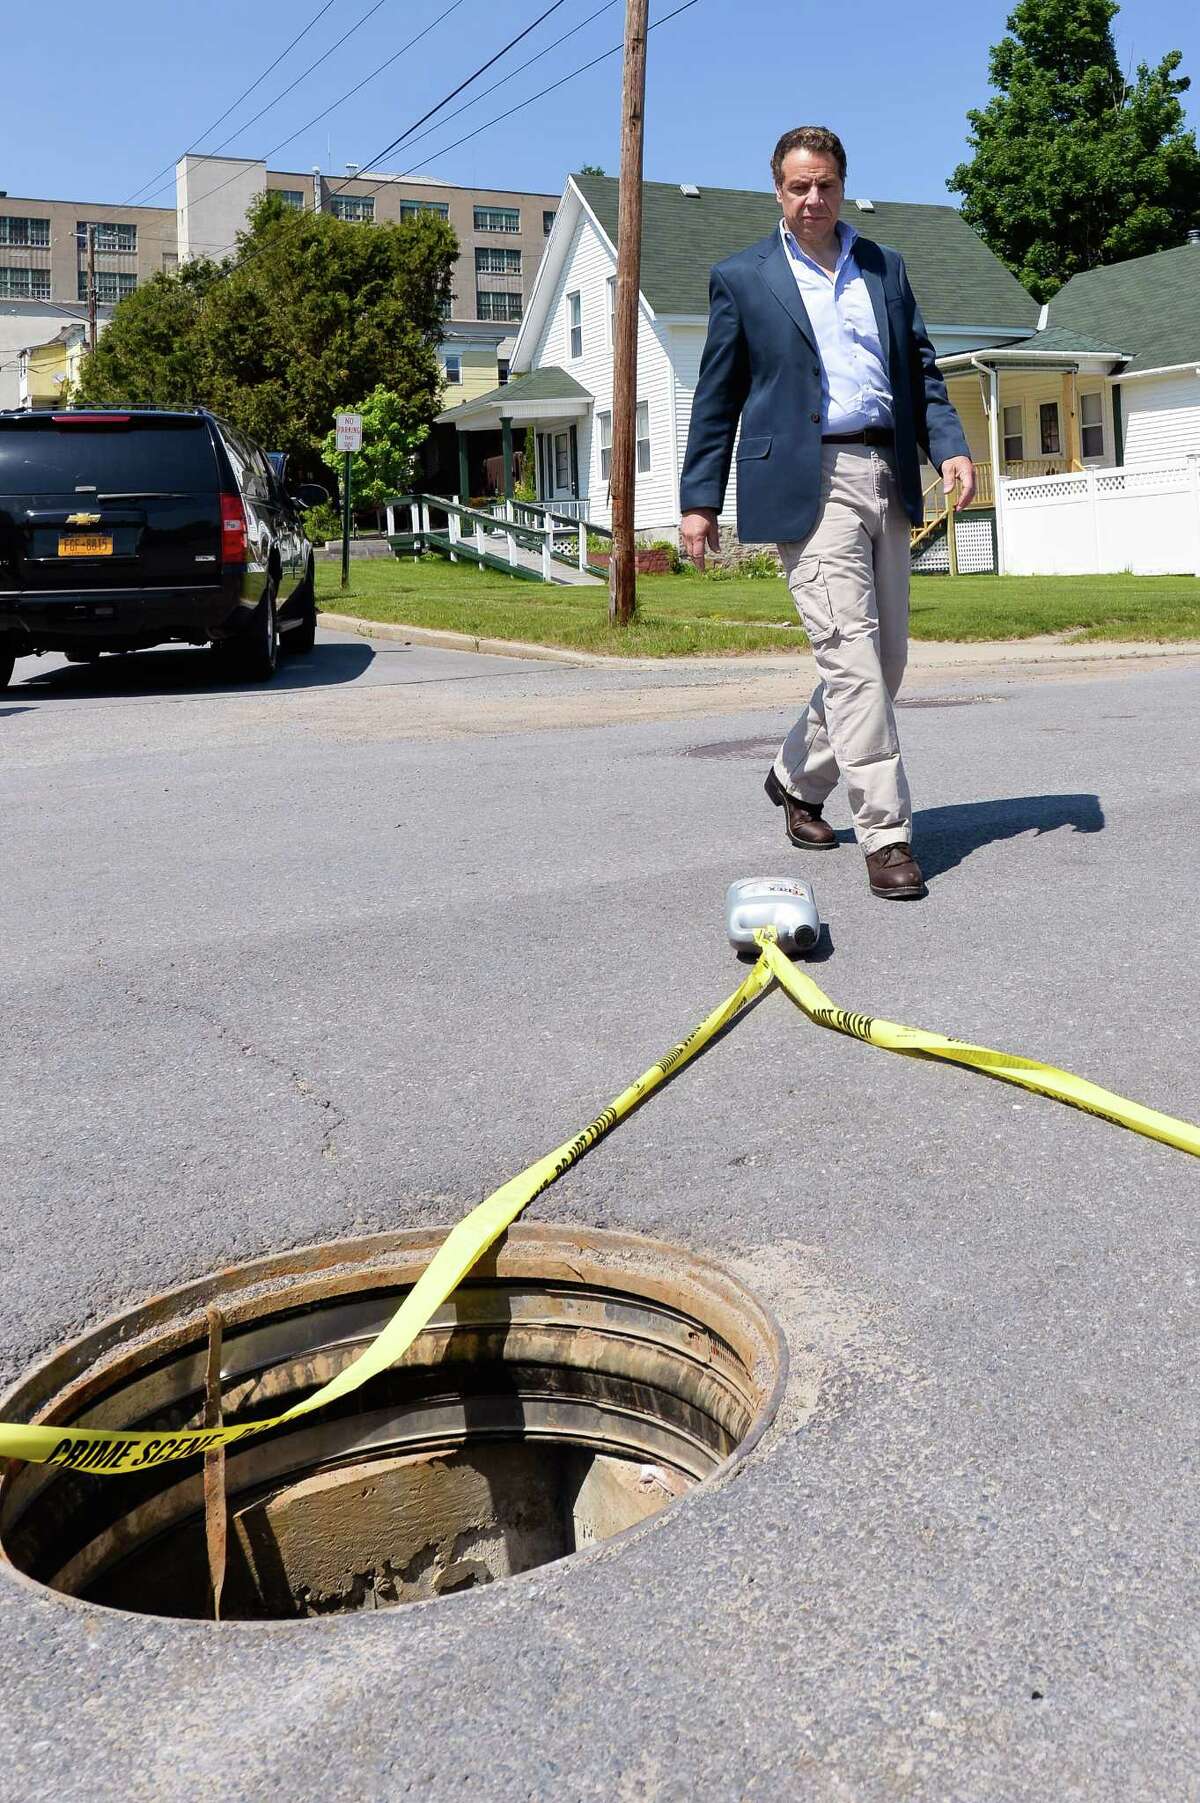 DANNERMORA, NY - JUNE 6: In this handout from the New York State Governor's Office, New York Gov. Andrew Cuomo (R) is shown the manhole where two convicted murderers escaped from the Clinton Correctional Facility June 6, 2014 in Dannemora, New York. Police are on a manhunt for Richard Matt, 48, and David Sweat, 34, who escaped from the maximum security prison June 6, 2015 using power tools and going through a manhole. (Photo by Darren McGee/New York State Governor's Office via Getty Images) ORG XMIT: 558782843